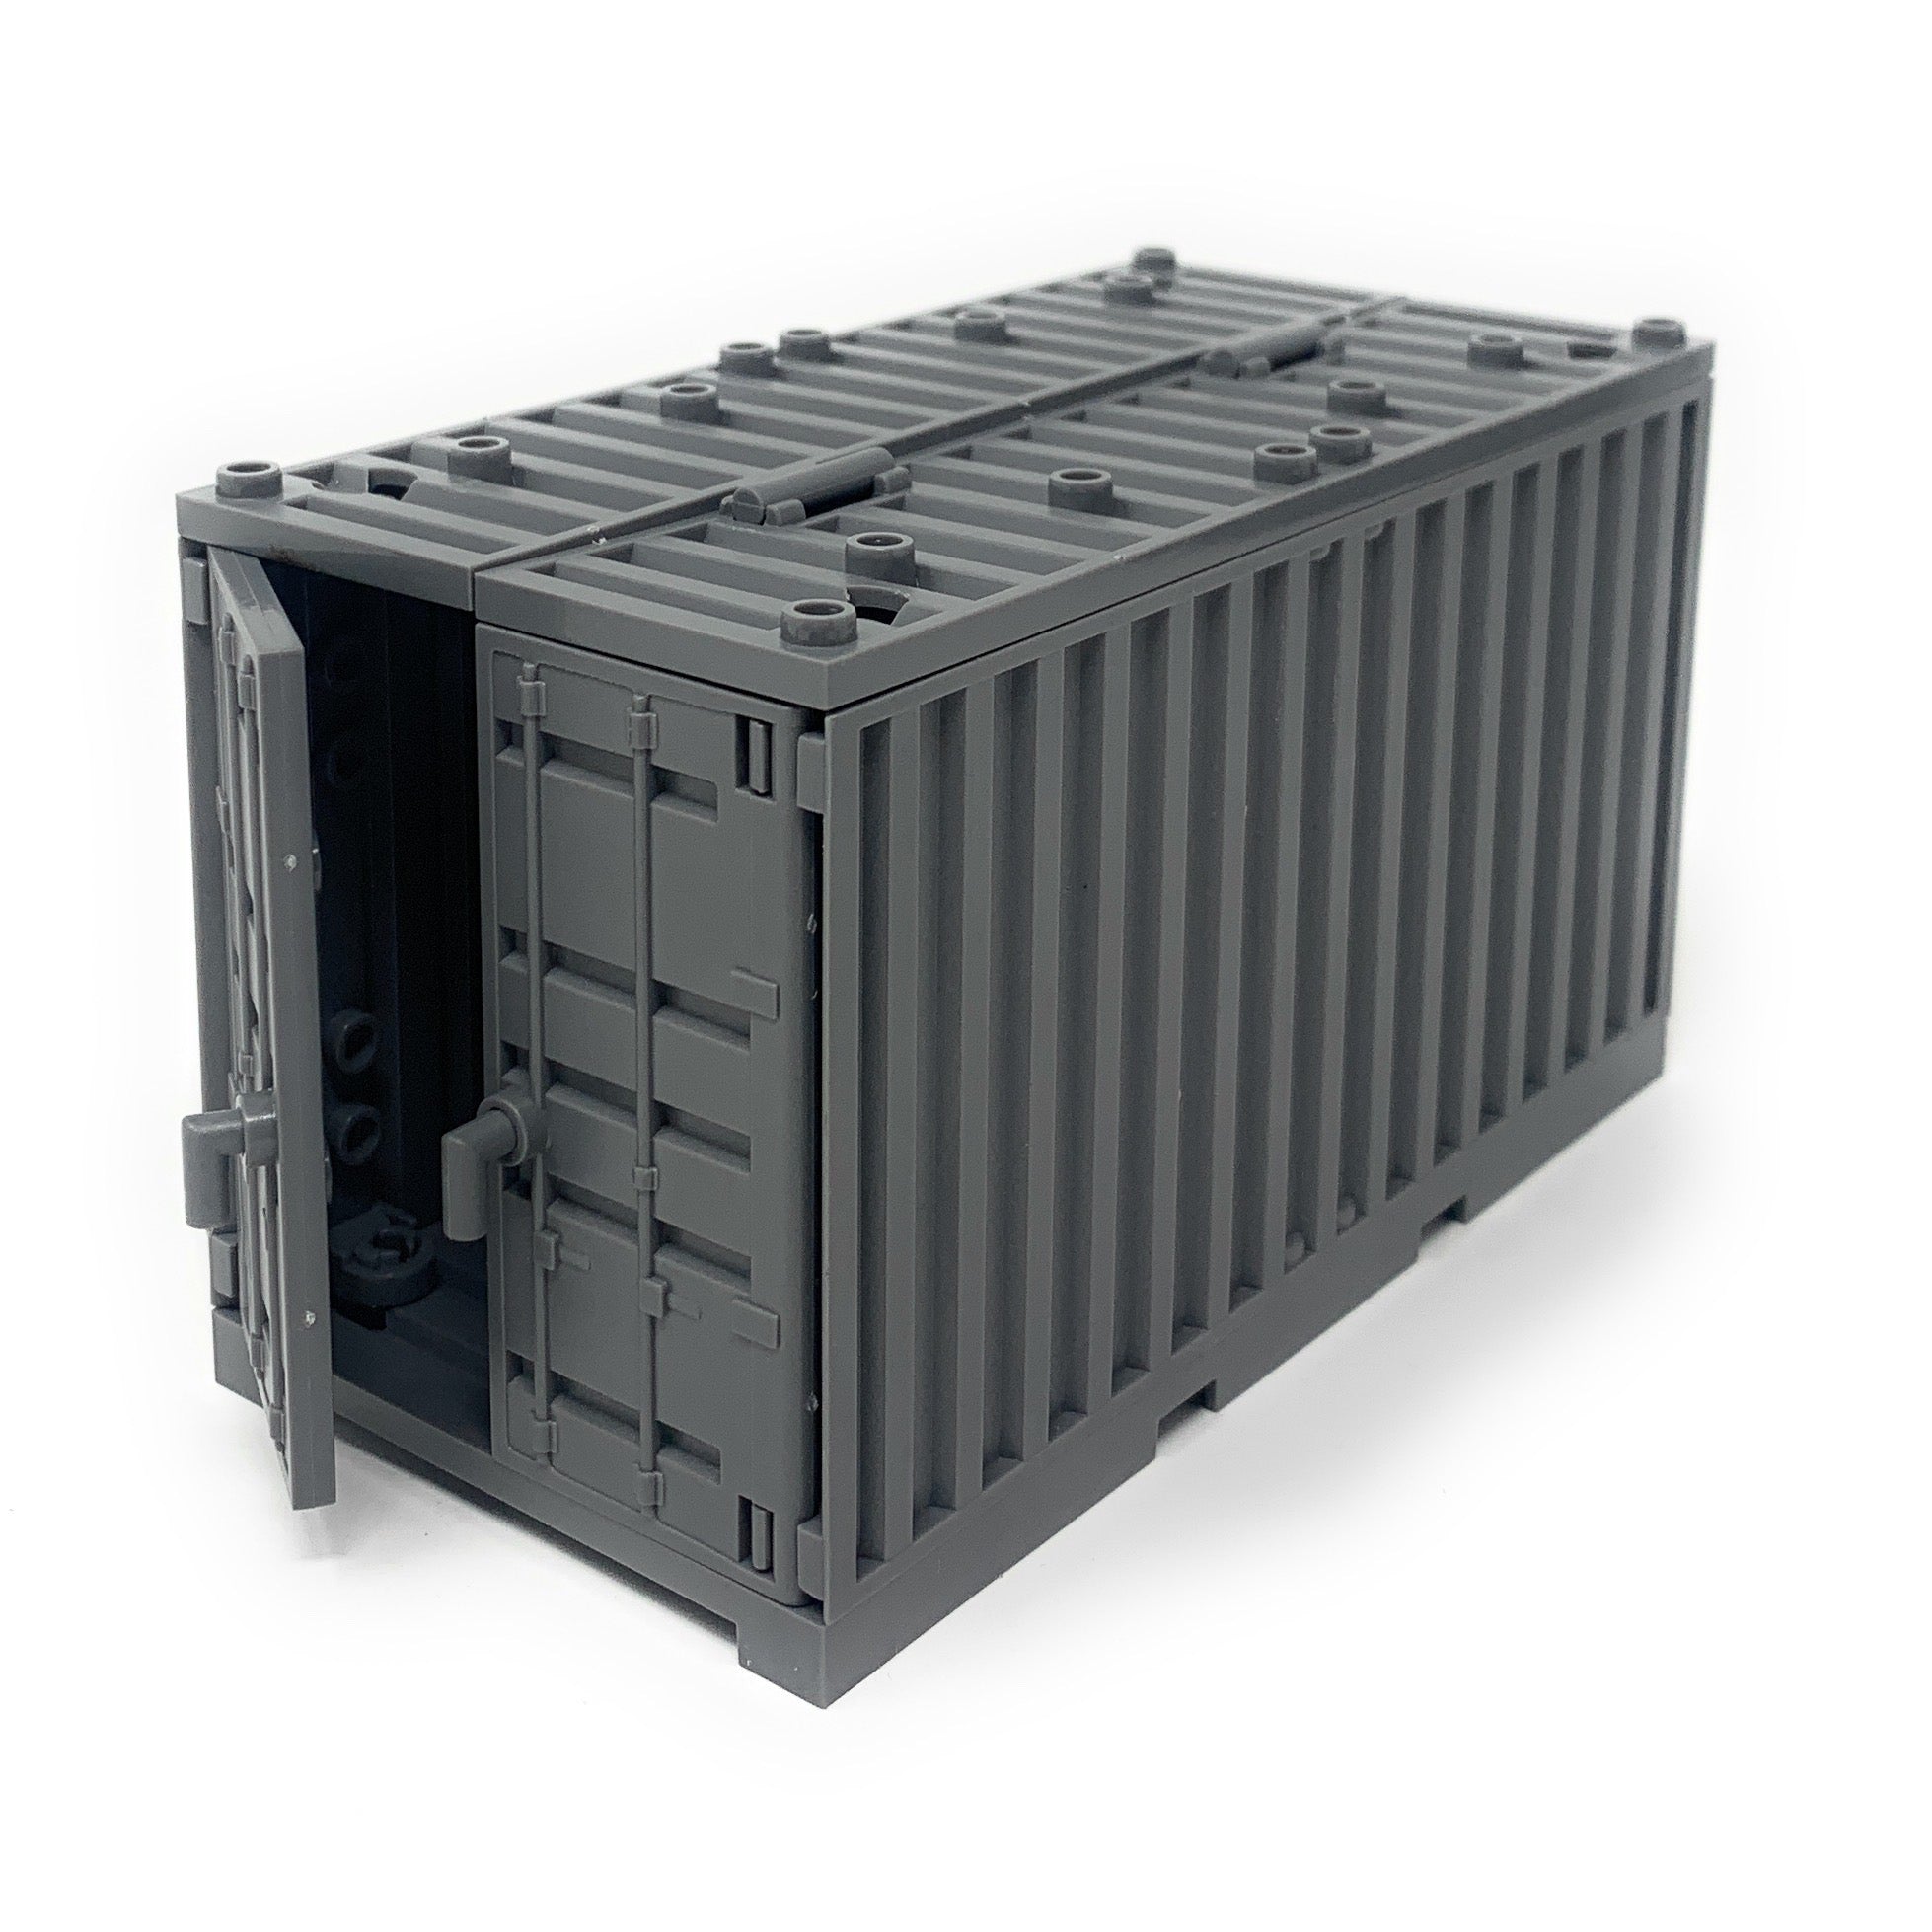 Black Cargo Shipping Container - LEGO Minifig Scale, Compatible